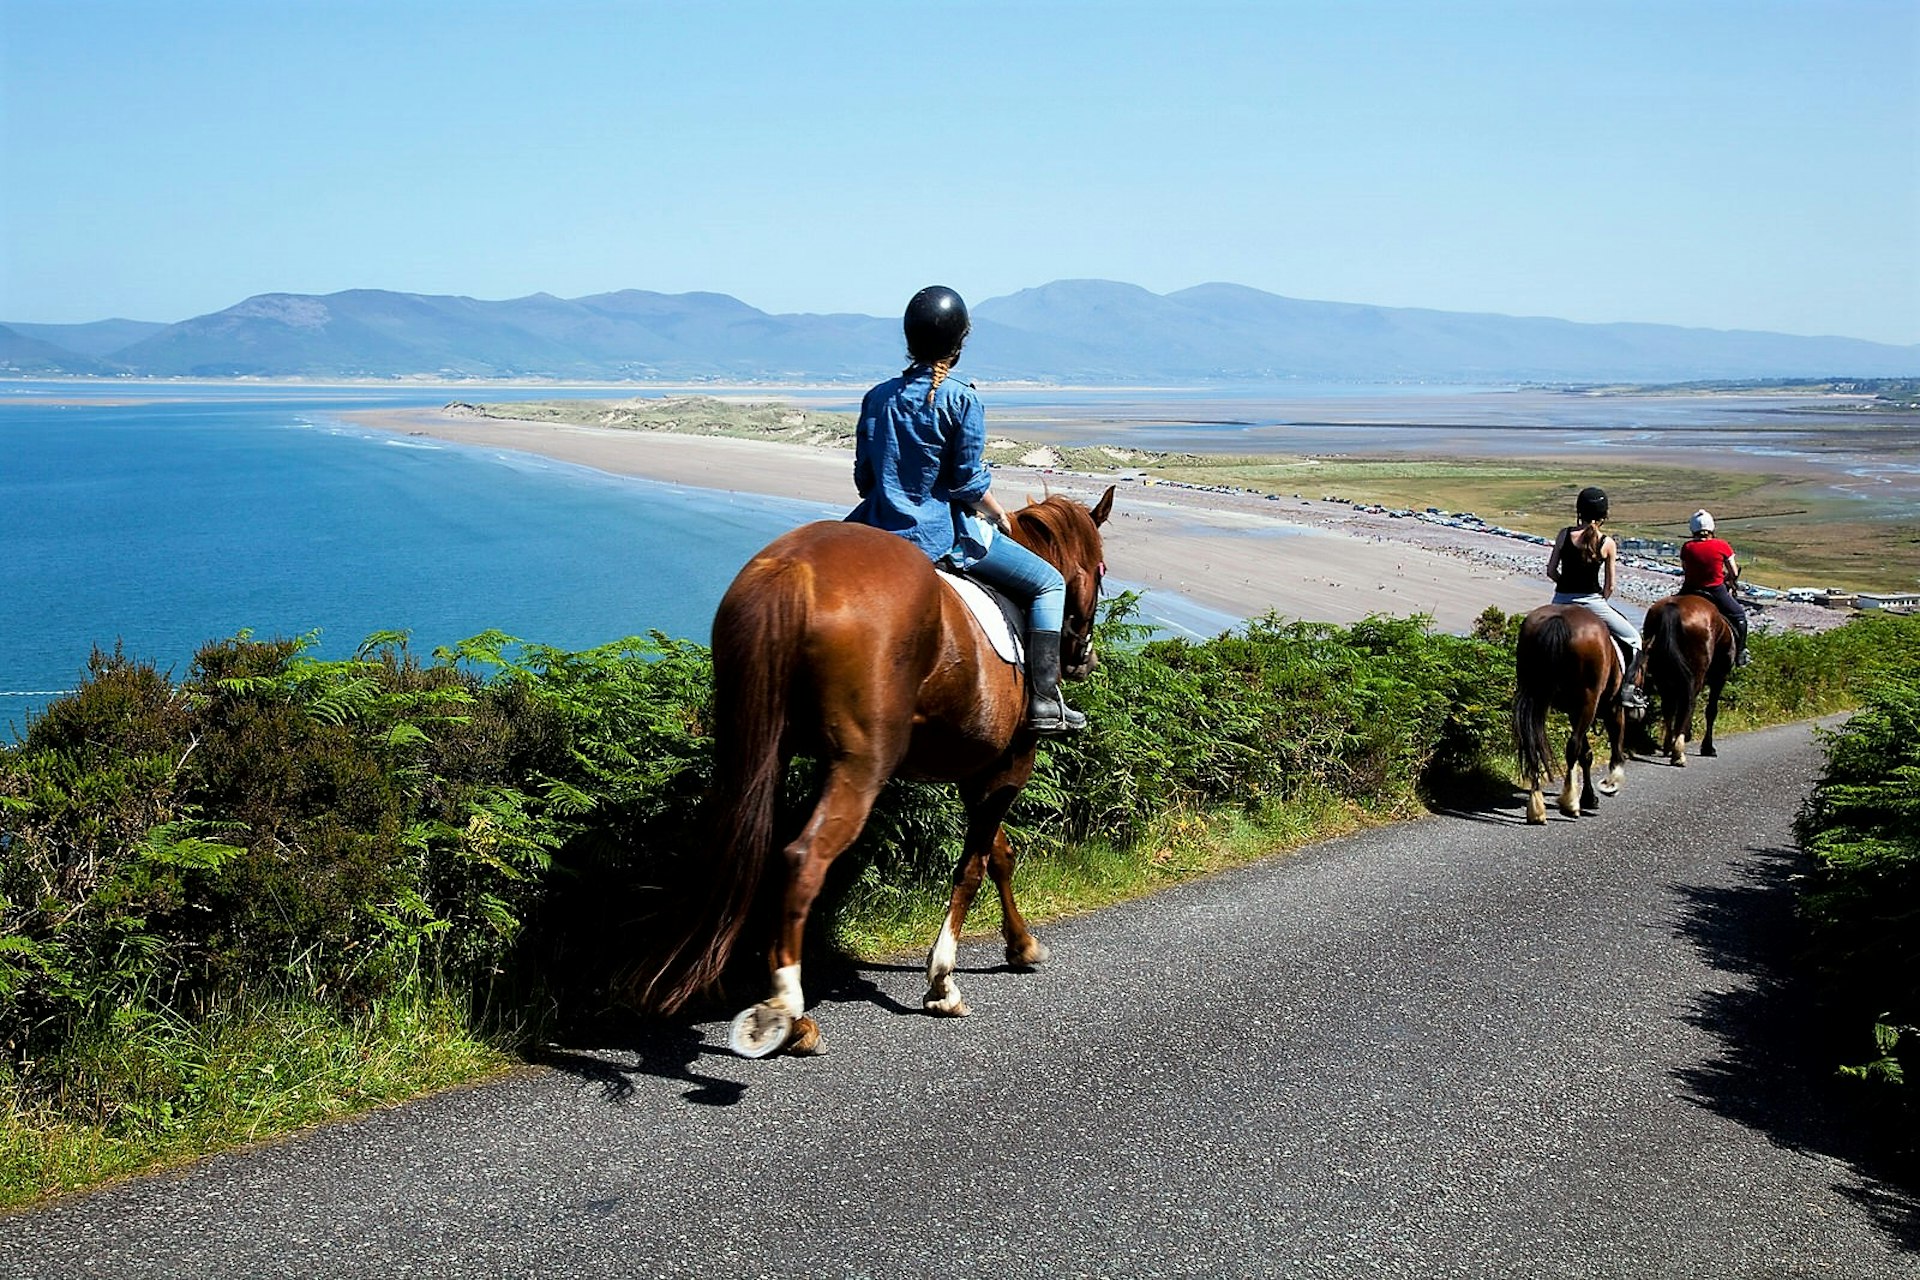 Horse and rider in narrow road with view of a sandy beach and some hills